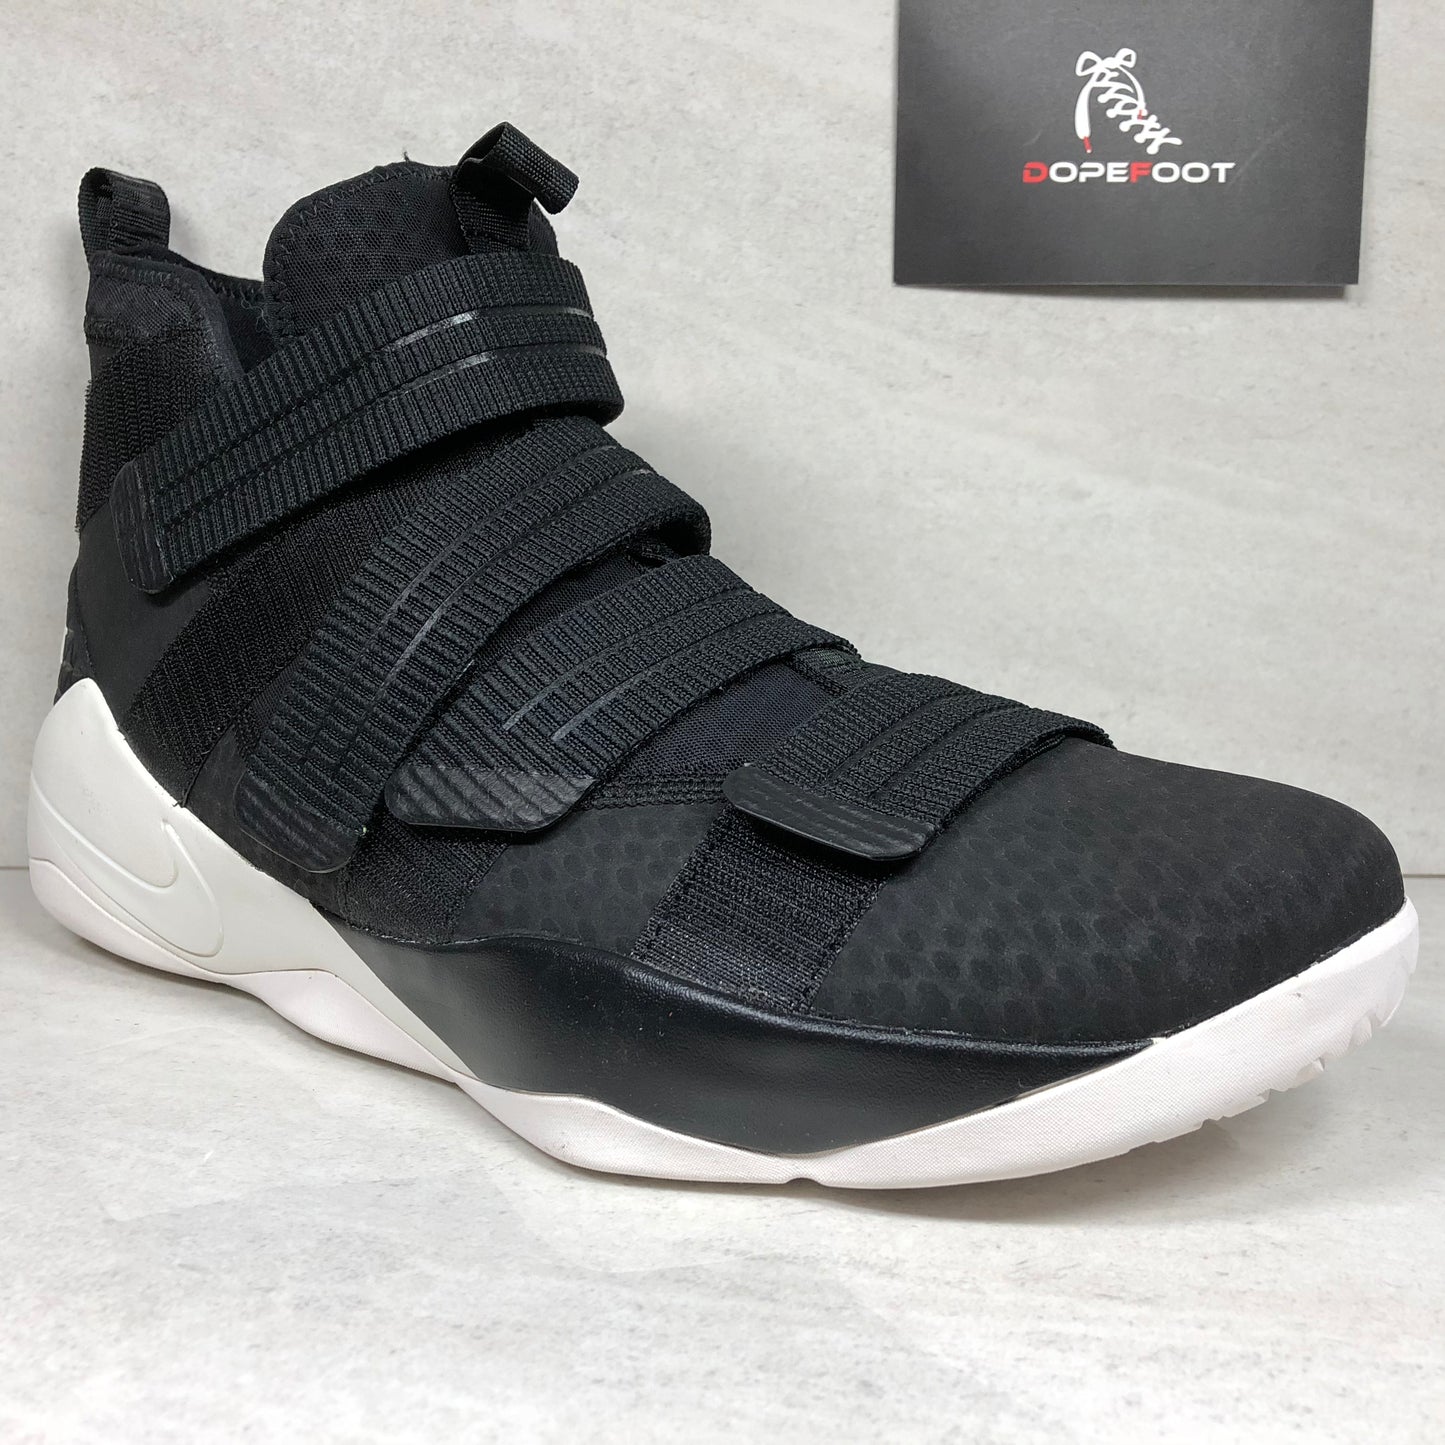 DS Nike Lebron Soldier 11 XI SFG Taille 13 Noir 897646 004